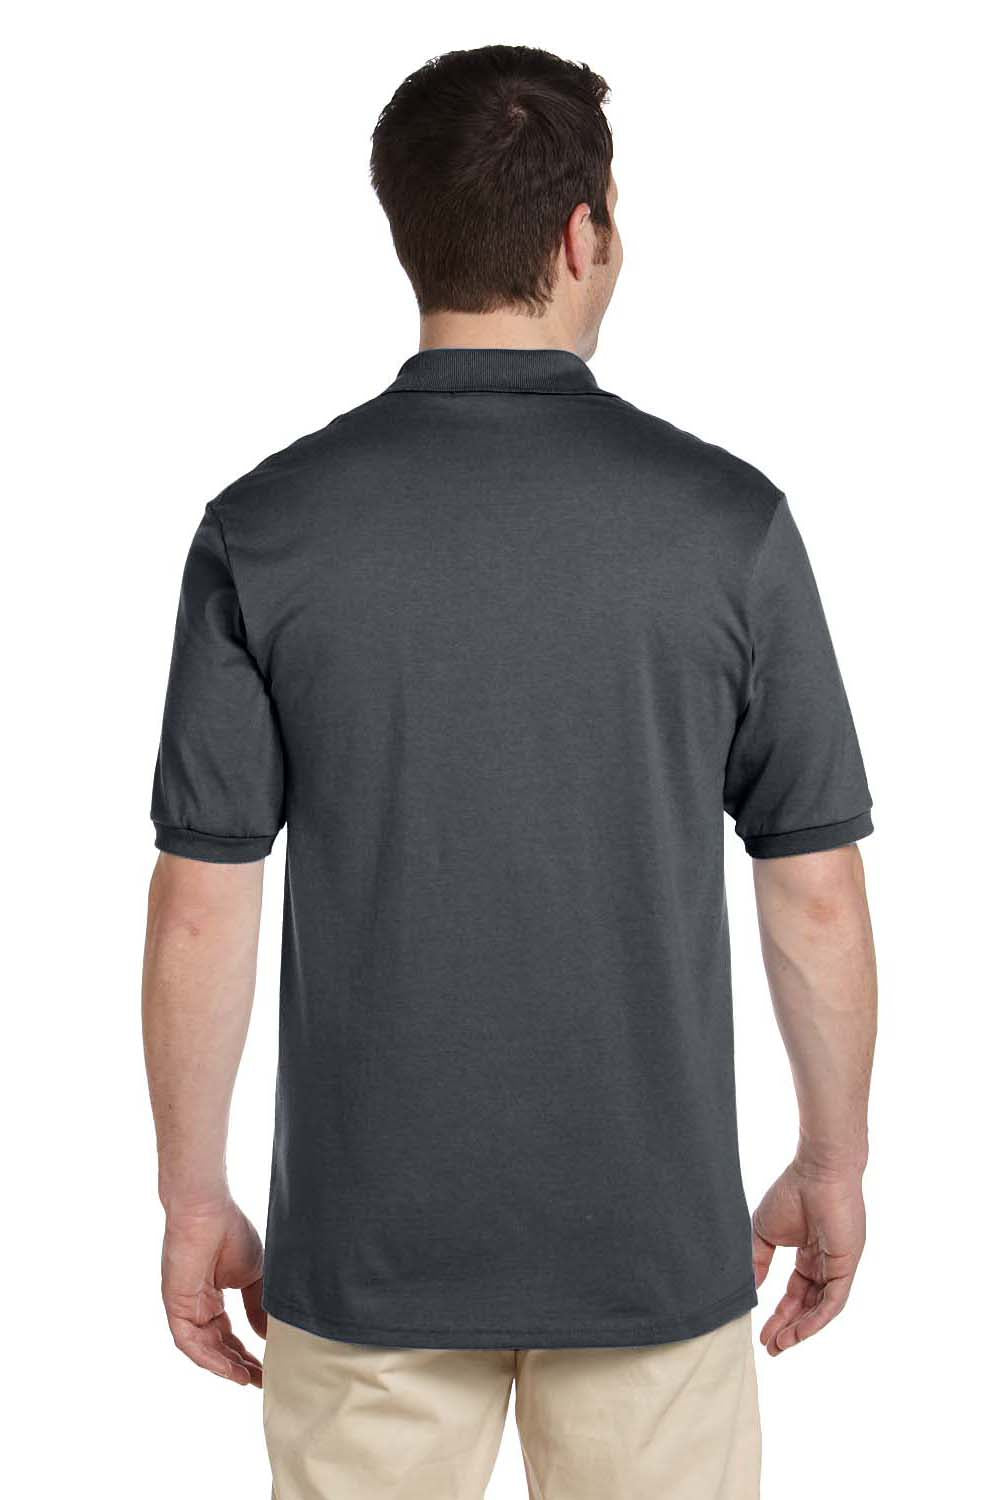 Jerzees 437 Mens SpotShield Stain Resistant Short Sleeve Polo Shirt Charcoal Grey Back